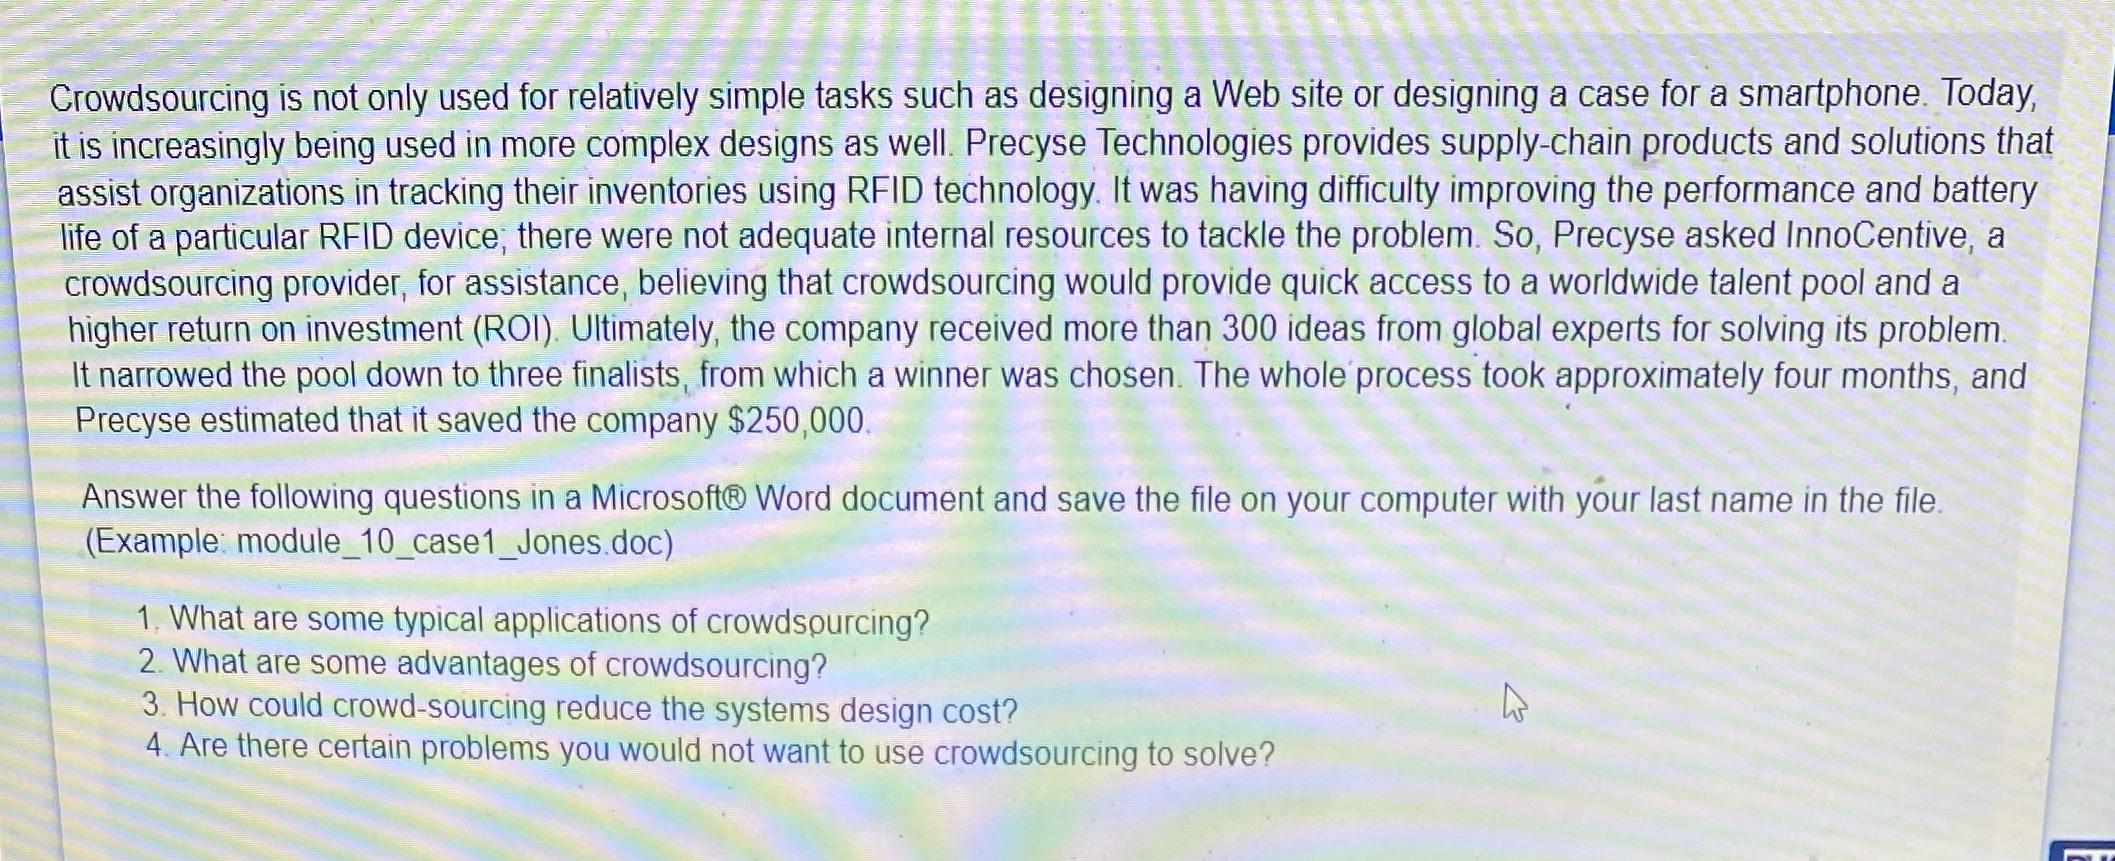 Crowdsourcing is not only used for relatively simple tasks such as designing a Web site or designing a case